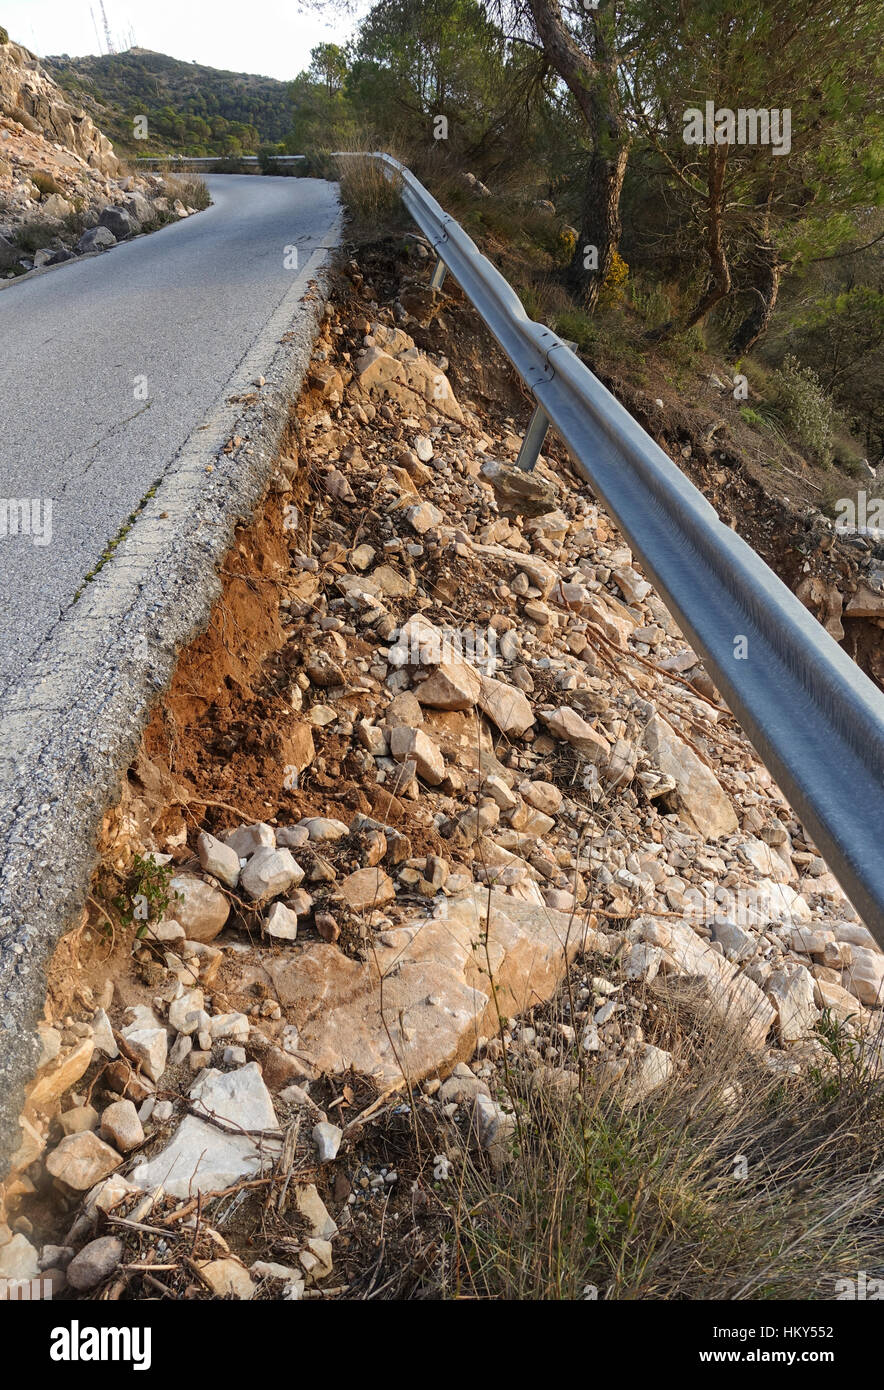 Road damage and loose Traffic barrier after heavy rainfall, Spain. Stock Photo